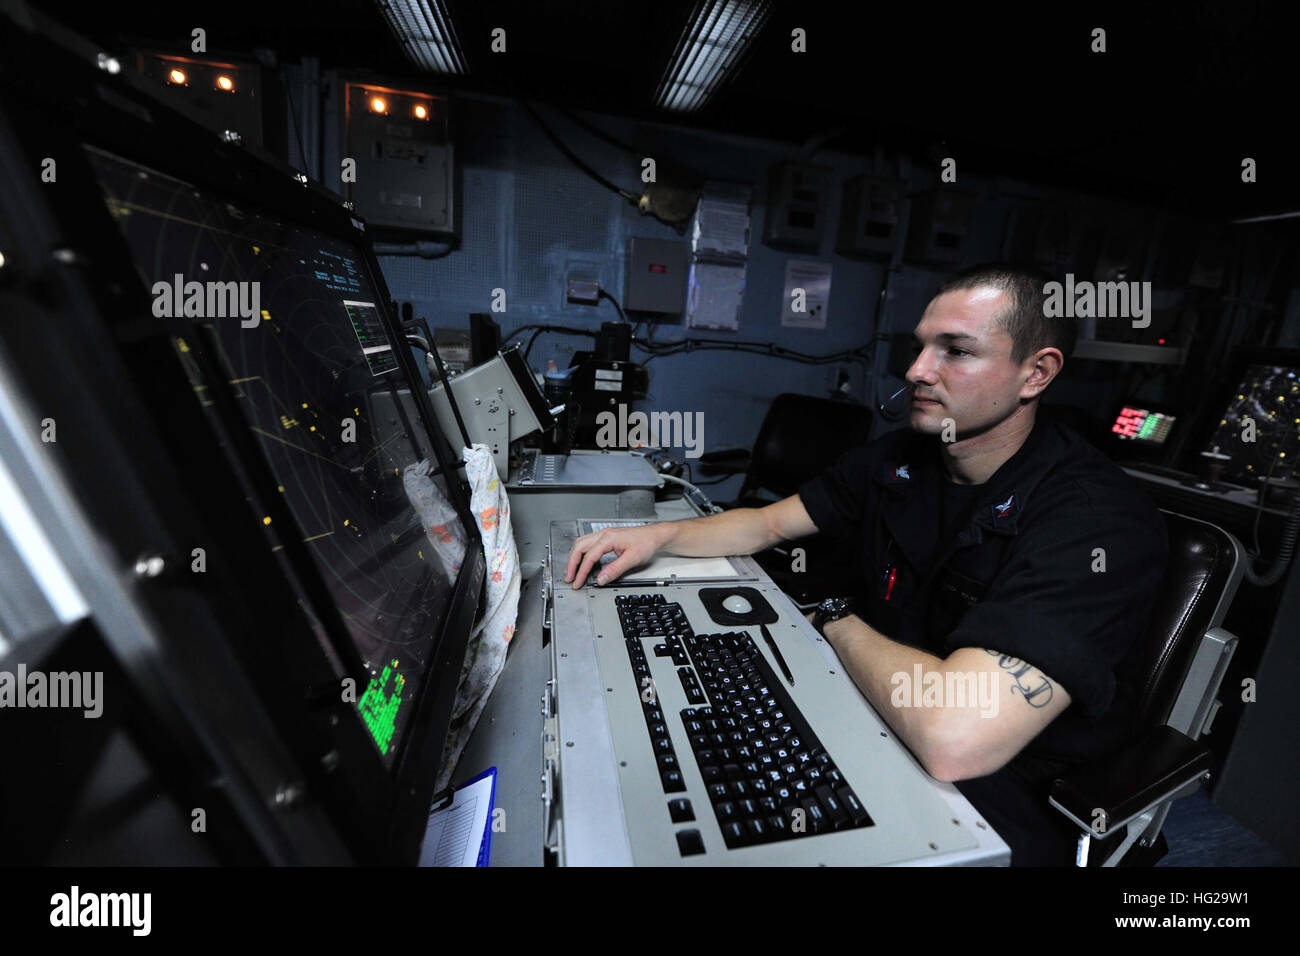 150921-N-PG340-028  ARABIAN GULF (Sept. 21, 2015) – Air Traffic Controller 2nd Class Derrick Hulme, from Sanford, Florida, monitors departing aircraft and ensures tanker assets are available for return from the carrier air traffic control center aboard the aircraft carrier USS Theodore Roosevelt (CVN 71). Theodore Roosevelt is deployed in the U.S. 5th Fleet area of operations supporting Operation Inherent Resolve, strike operations in Iraq and Syria as directed, maritime security operations and theater security cooperation efforts in the region. (U.S. Navy photo by Mass Communication Specialis Stock Photo